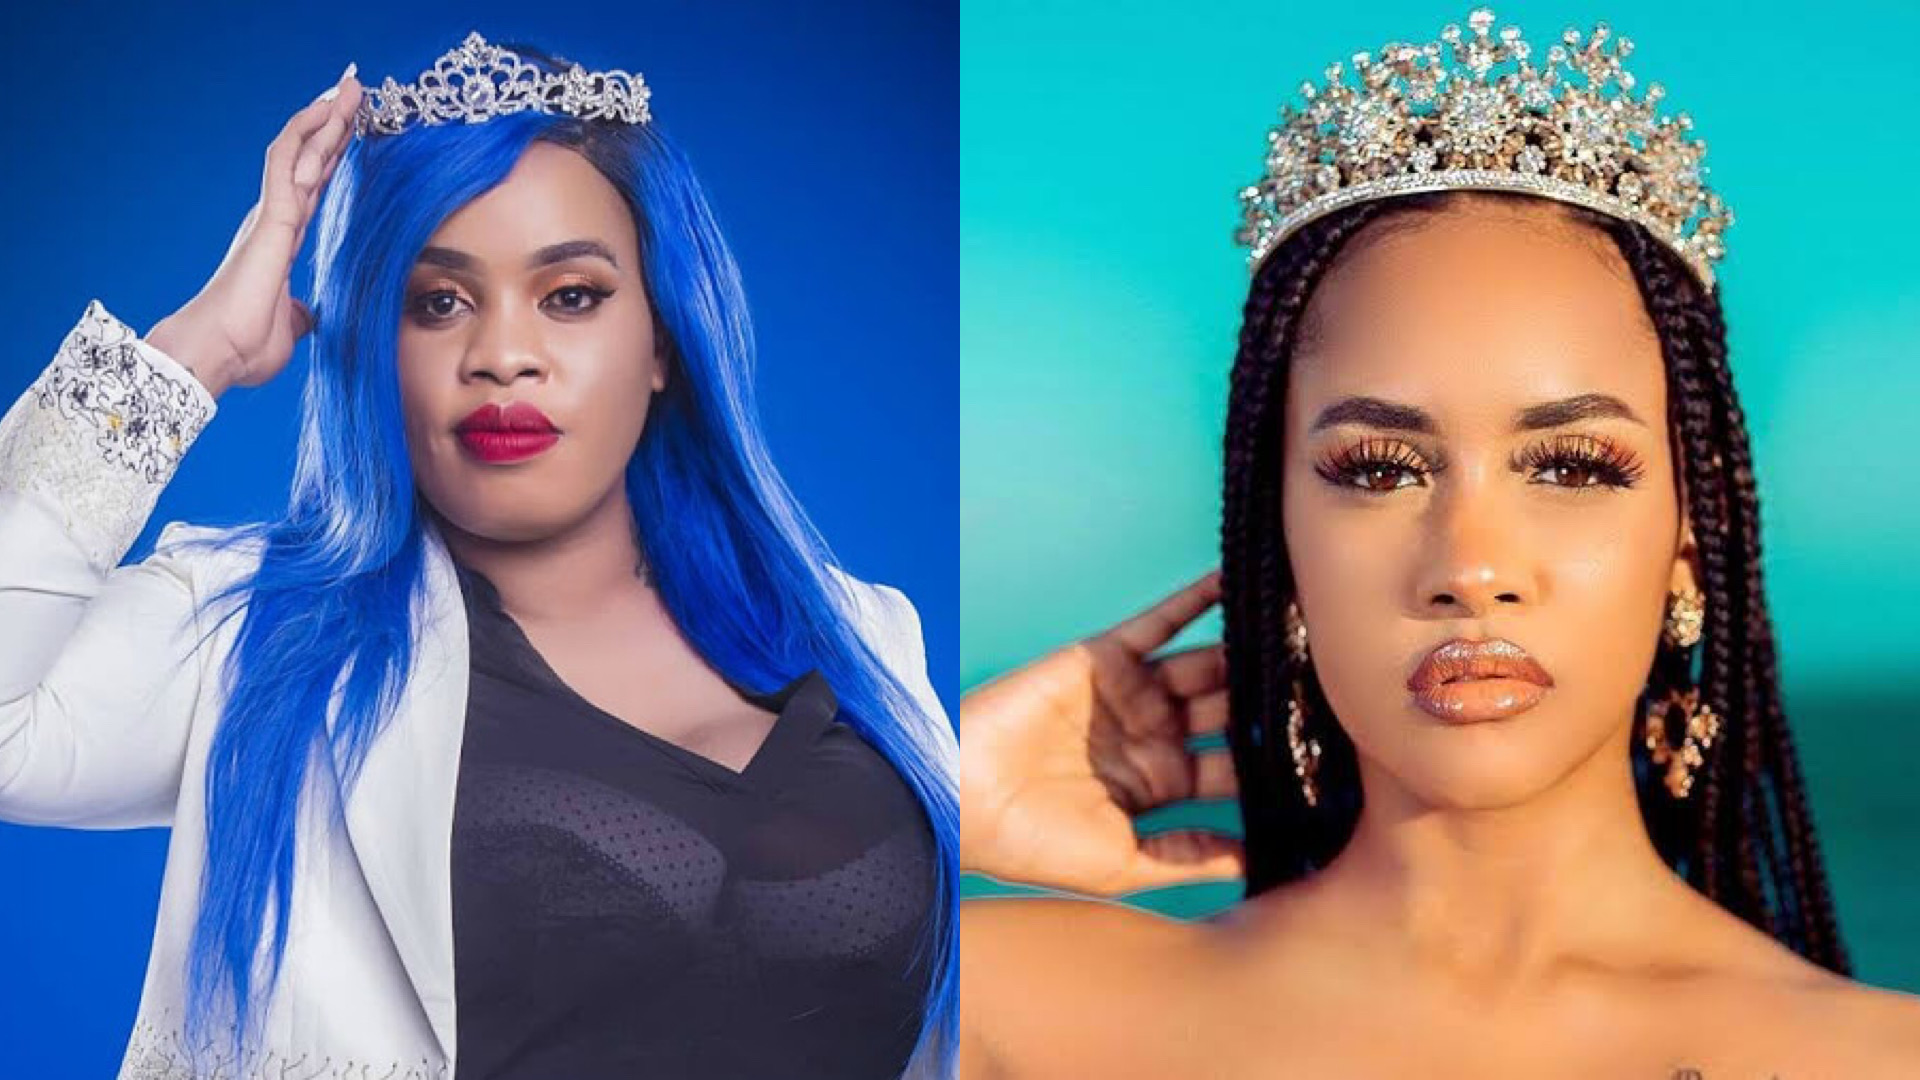 “That’s even why Diamond Platnumz dumped you!” Bridget Achieng fires shots at Tanasha Donna who failed to perform at Naifest 2 (Video)